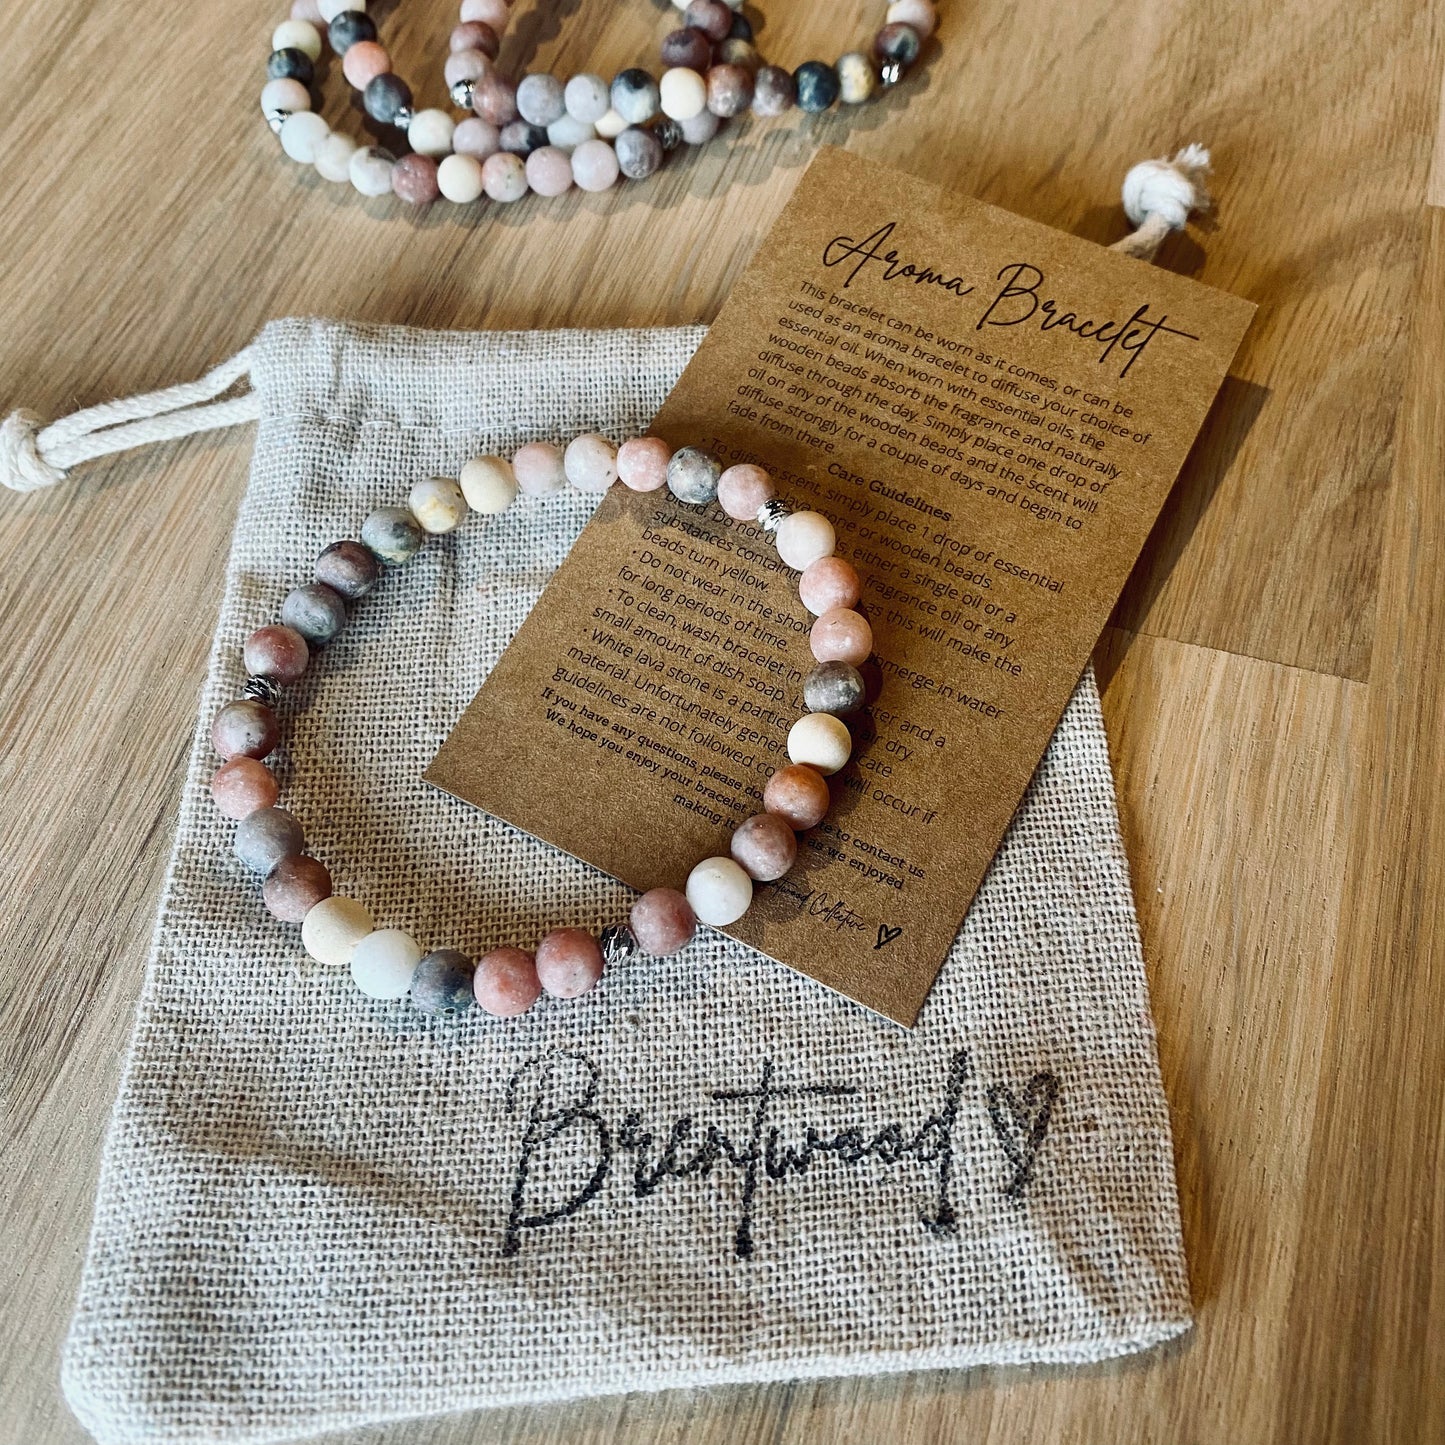 Mixed Marble Aroma Bracelet - 6mm beaded diffuser bracelet made from mixed marble & natural white wooden beads with platinum plated balls as embellishments. Laid on cloth pouch/drawstring bag stamped with “Brentwood” and an aroma bracelet information and care card on kraft brown card.